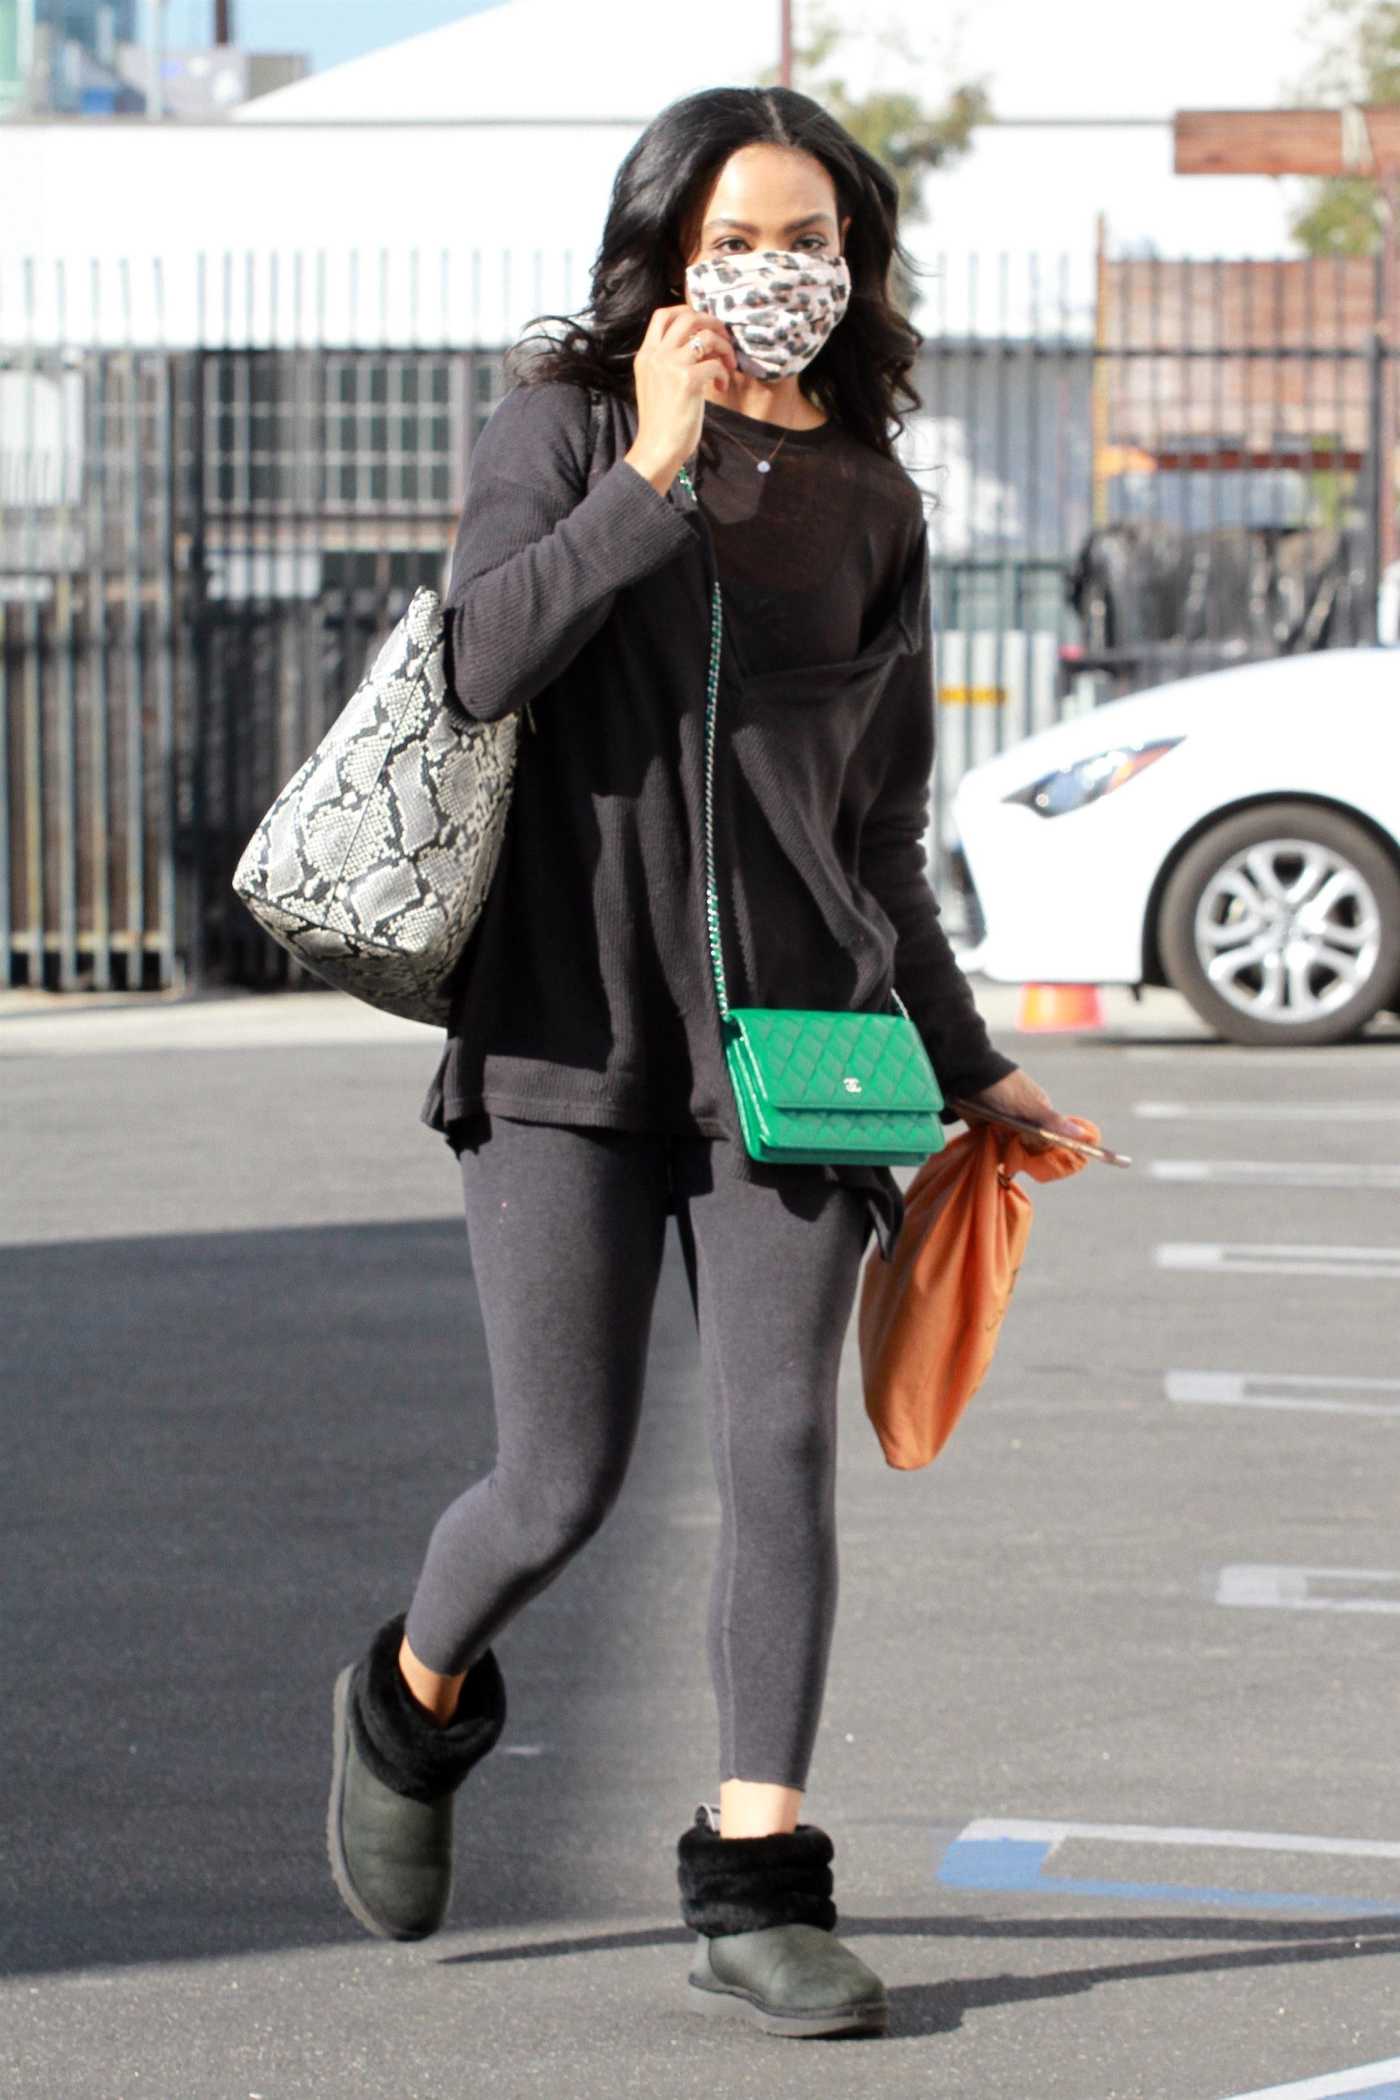 Britt Stewart in a Black Leggings Arrives for Dance Practice at the DWTS Studio in Los Angeles 11/13/2020